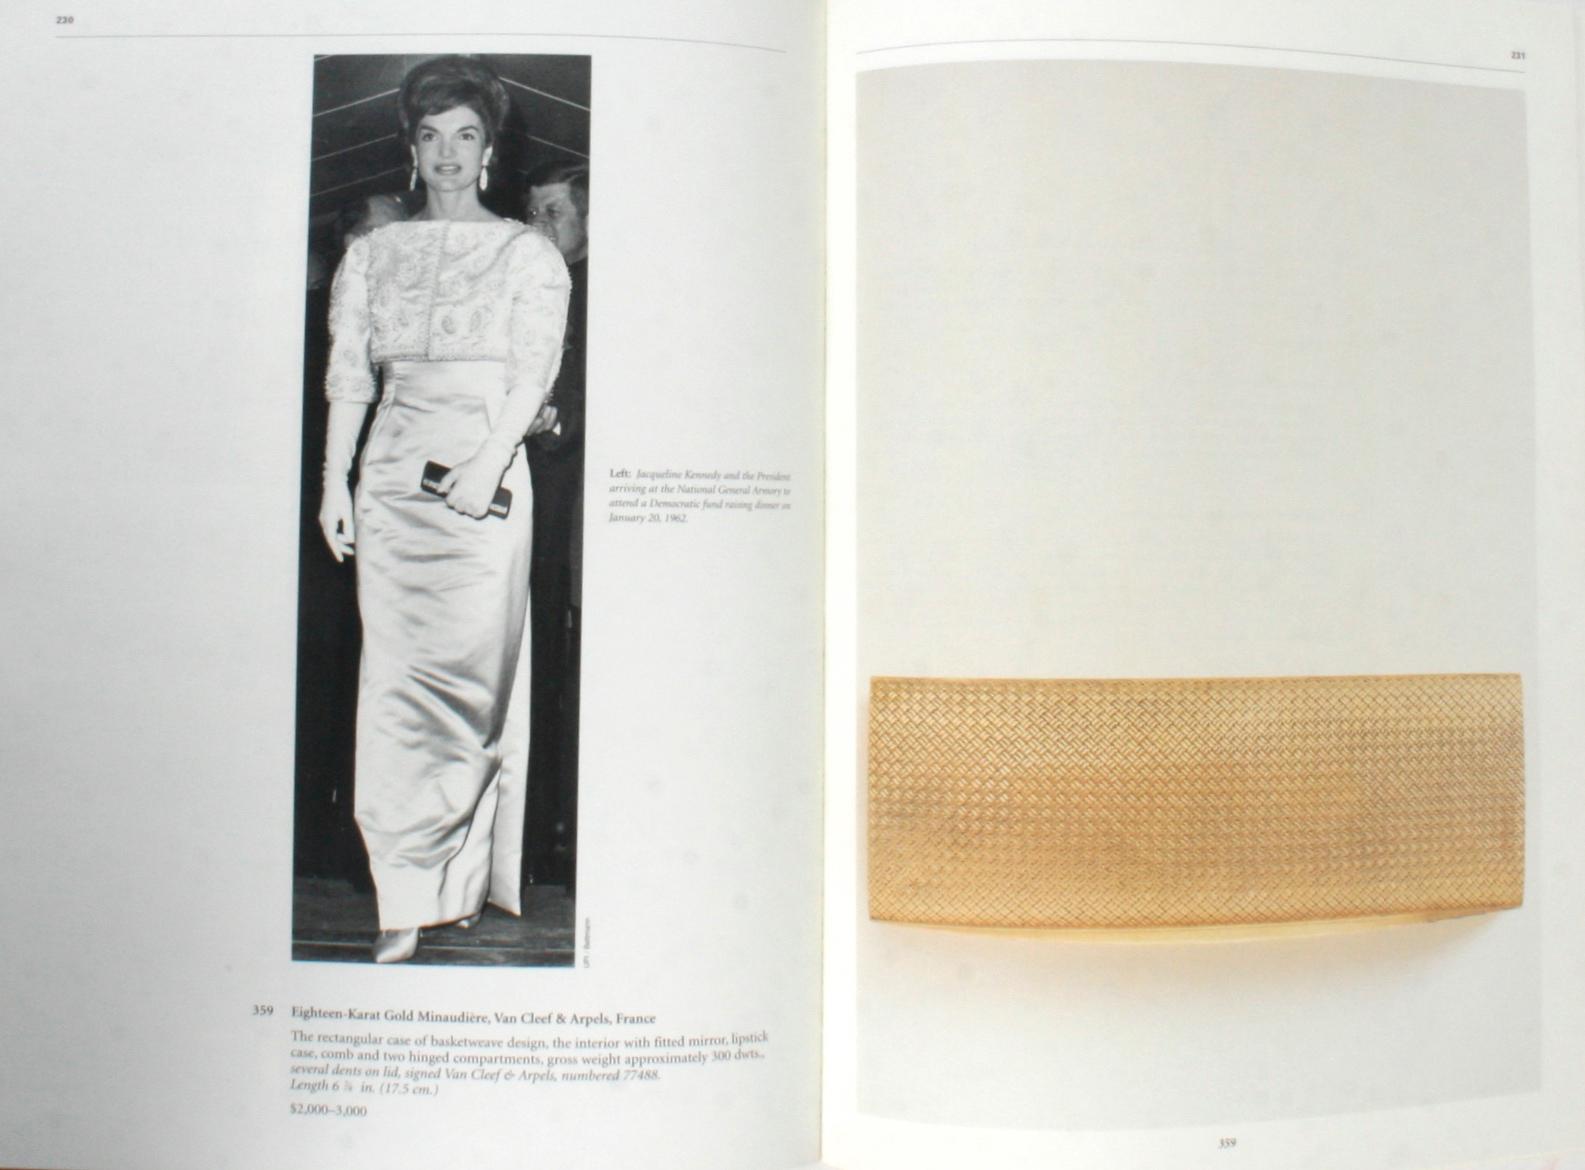 Paper Sotheby's, The Estate of Jacqueline Kennedy Onassis